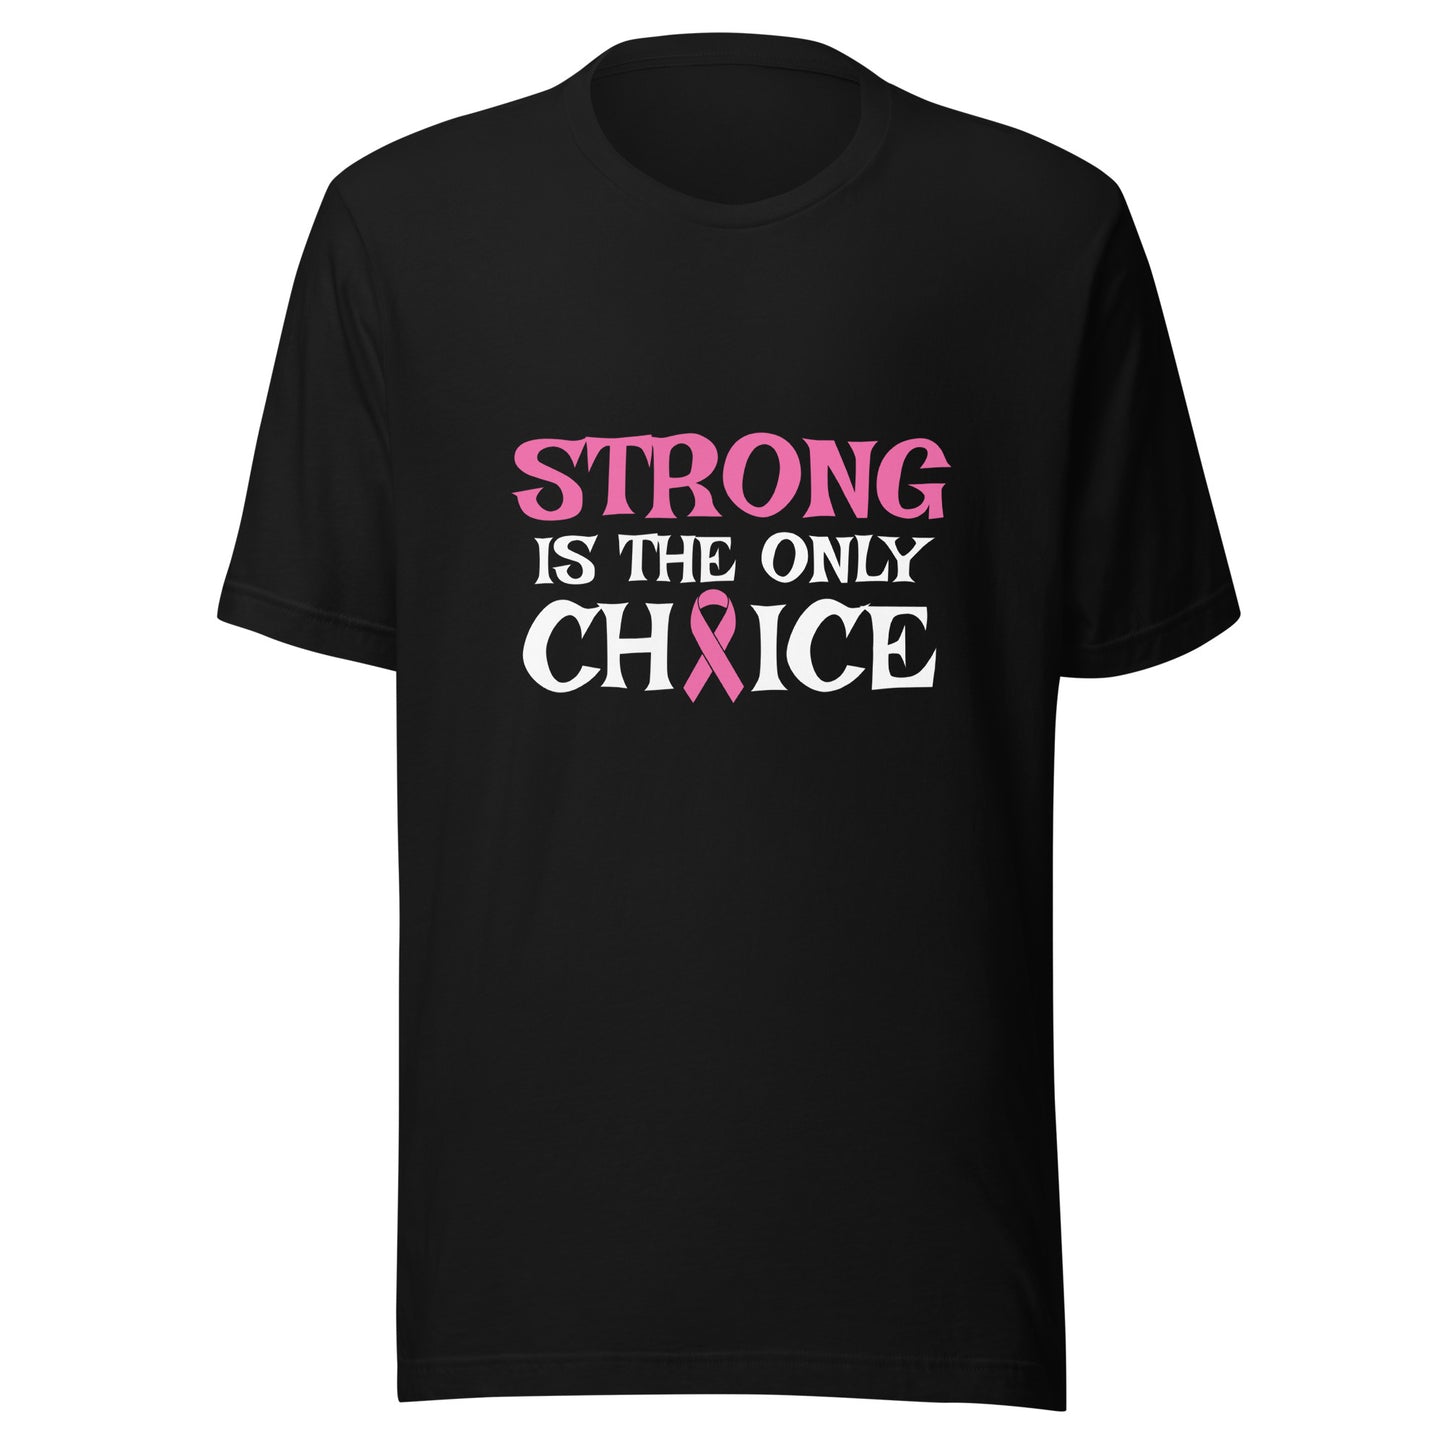 Strong is the only Choice - Breast Cancer Awareness Pink Cancer Ribbon Support Unisex T-shirt